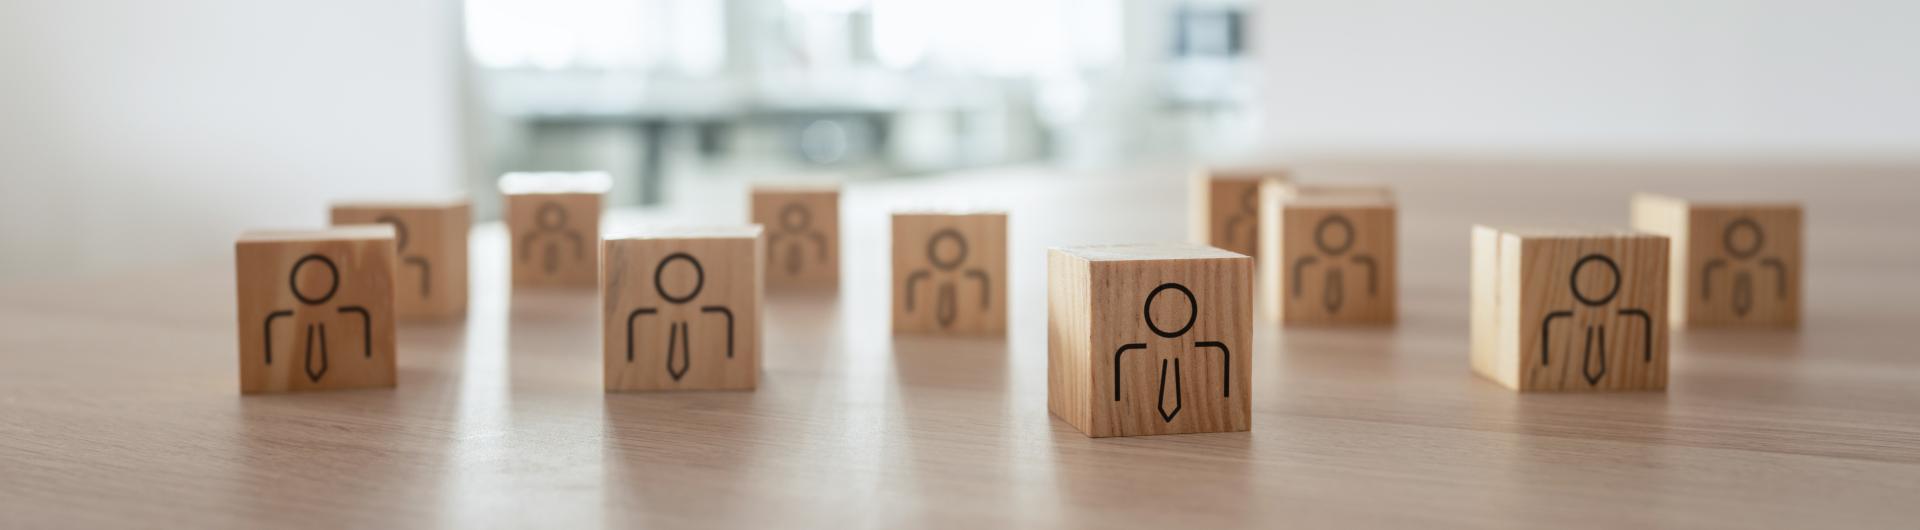 group of wooden blocks with silhouettes of people.